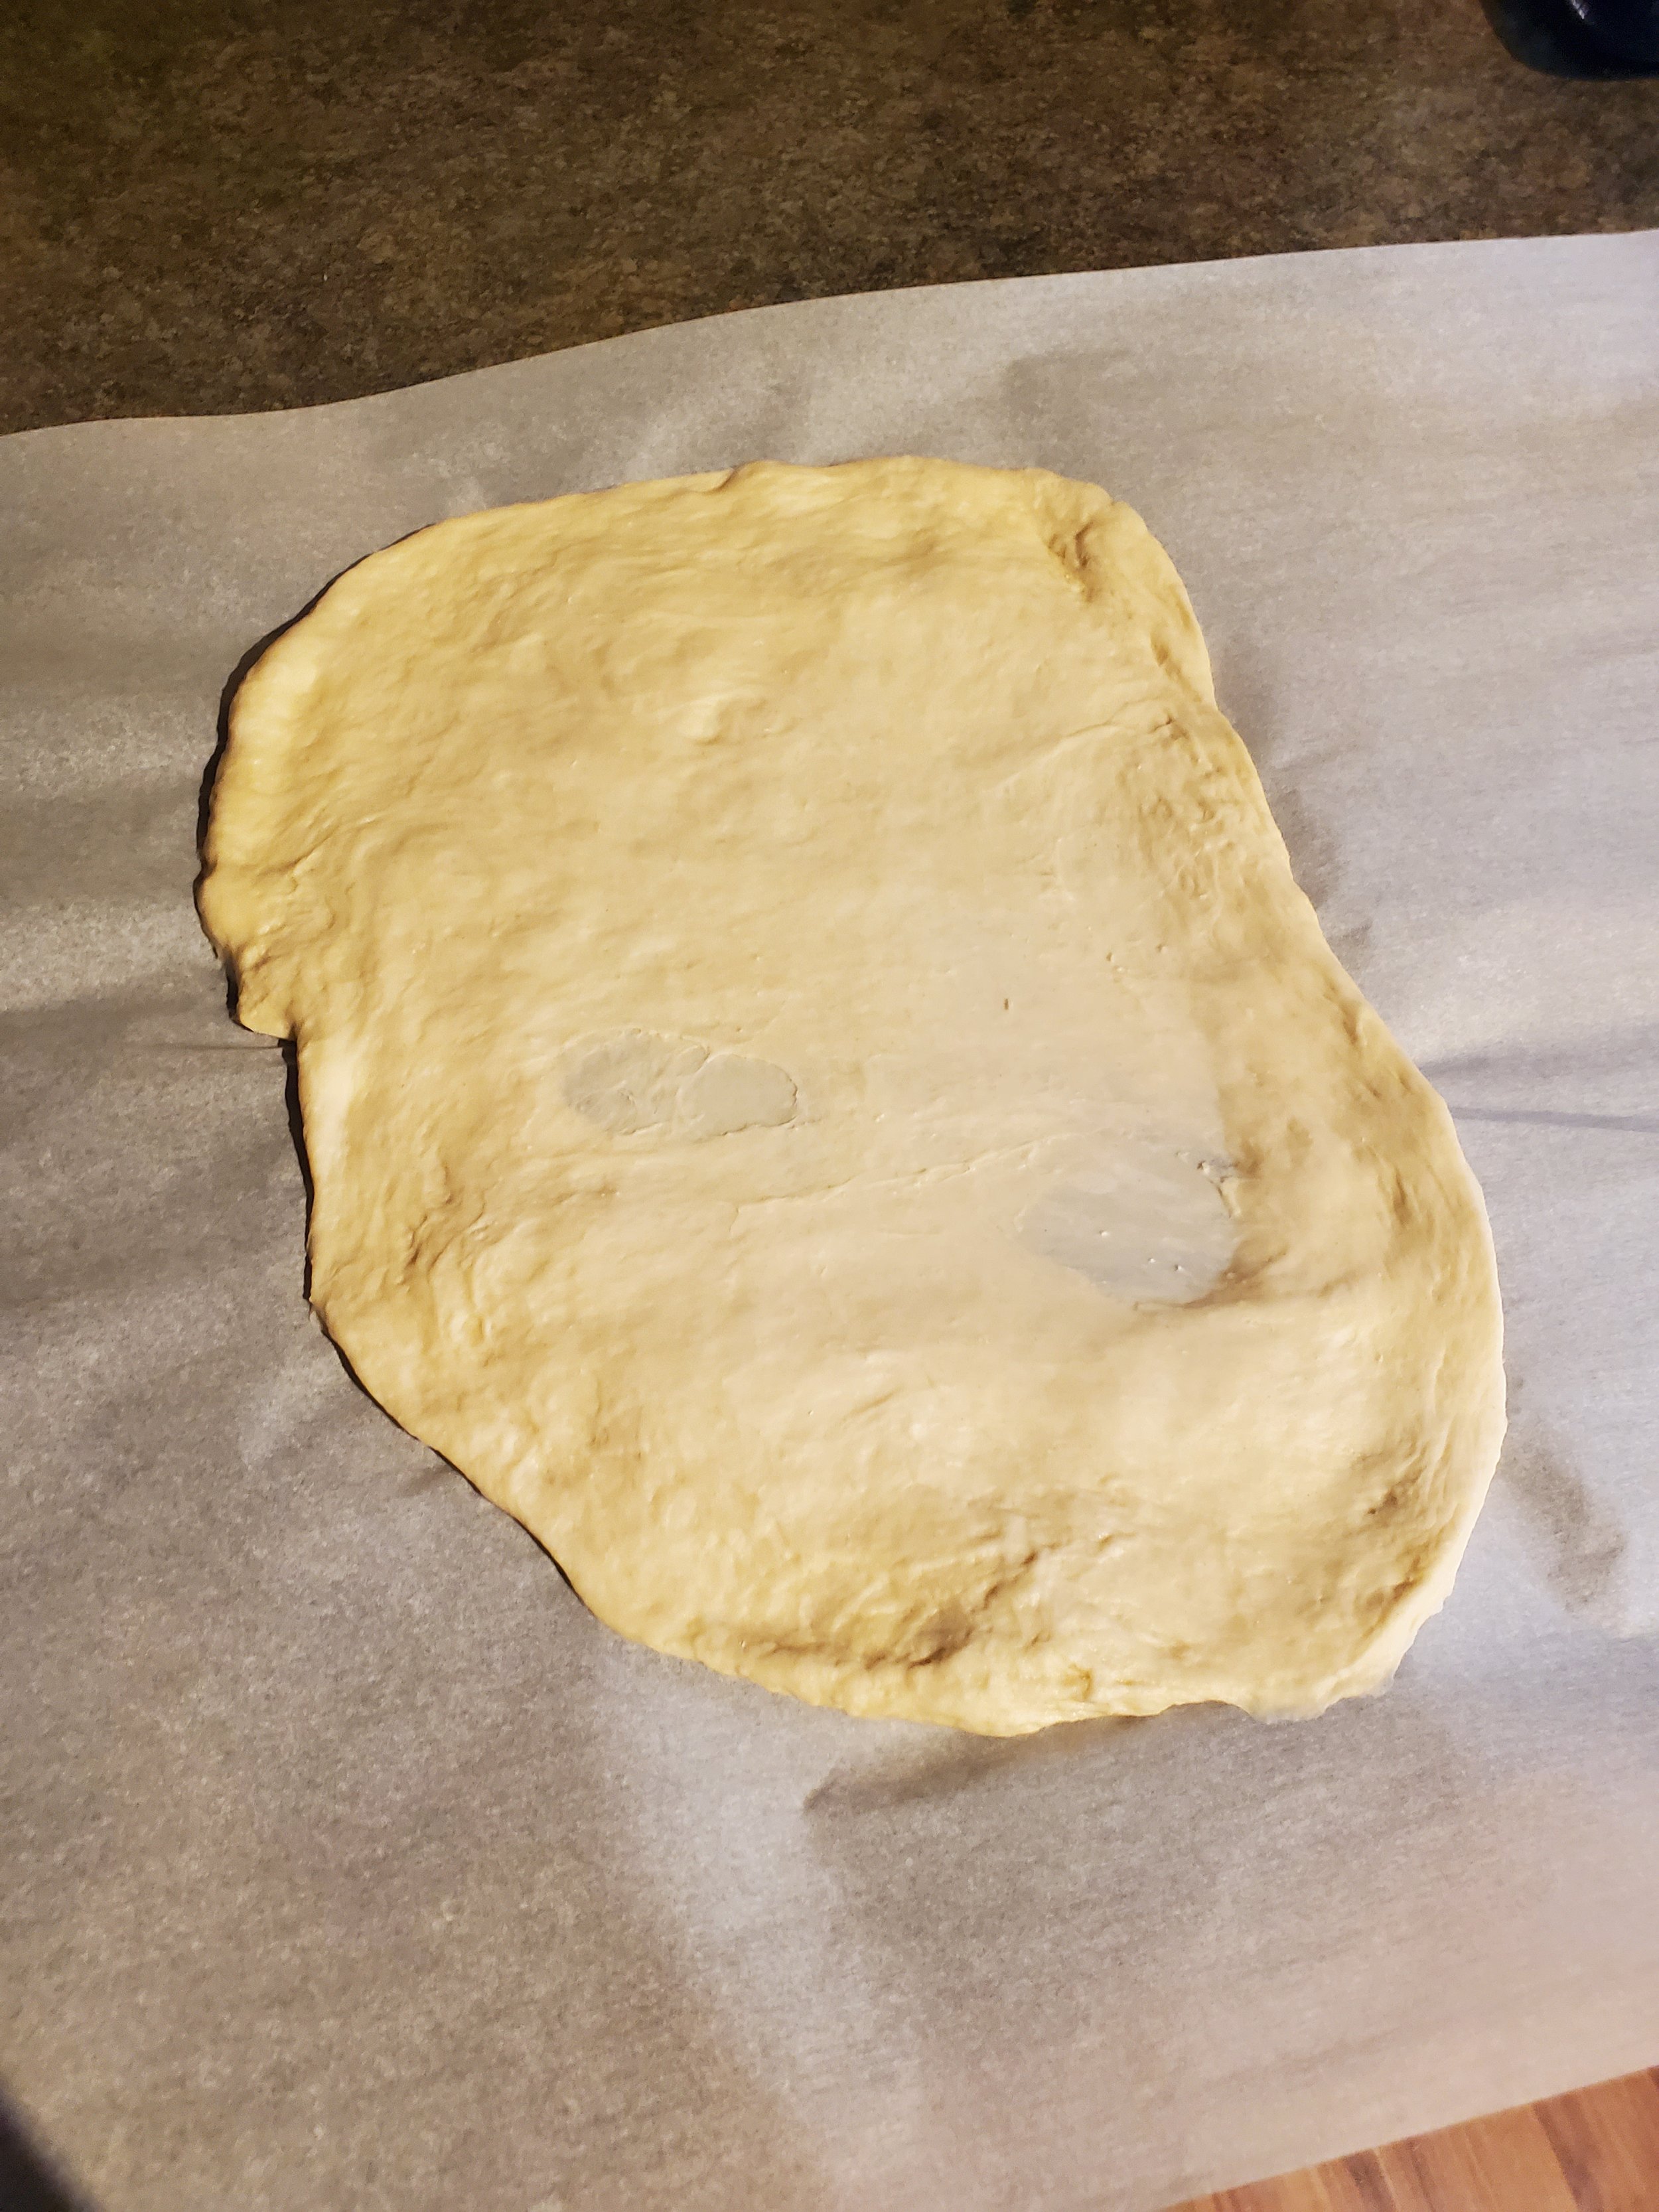 Rolling out your dough and stretching it to get ready for the stromboli